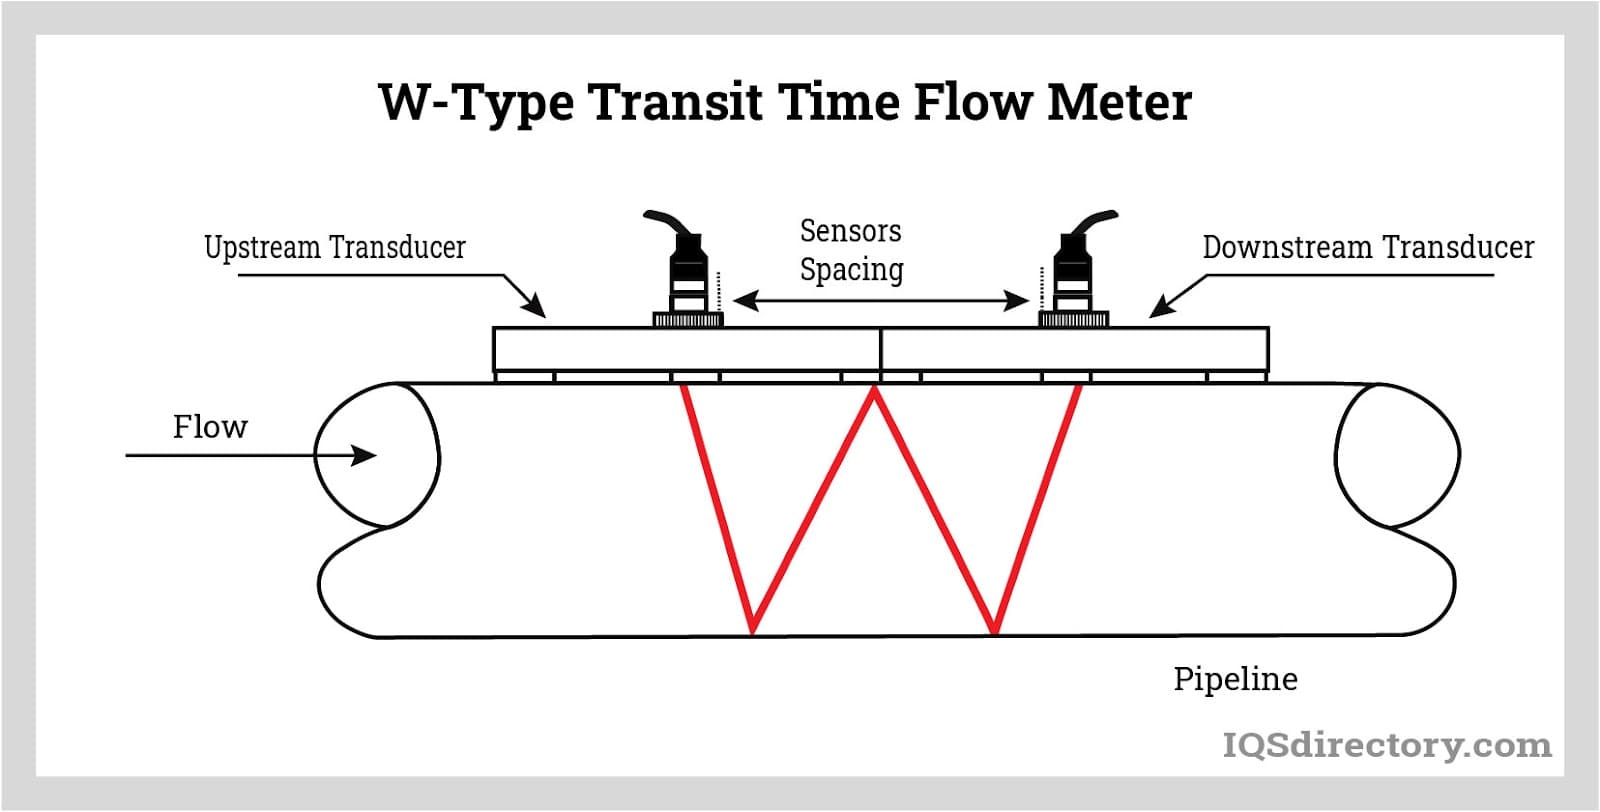 Ultrasonic Flow Meter: What Is It? How Does It Work? Types